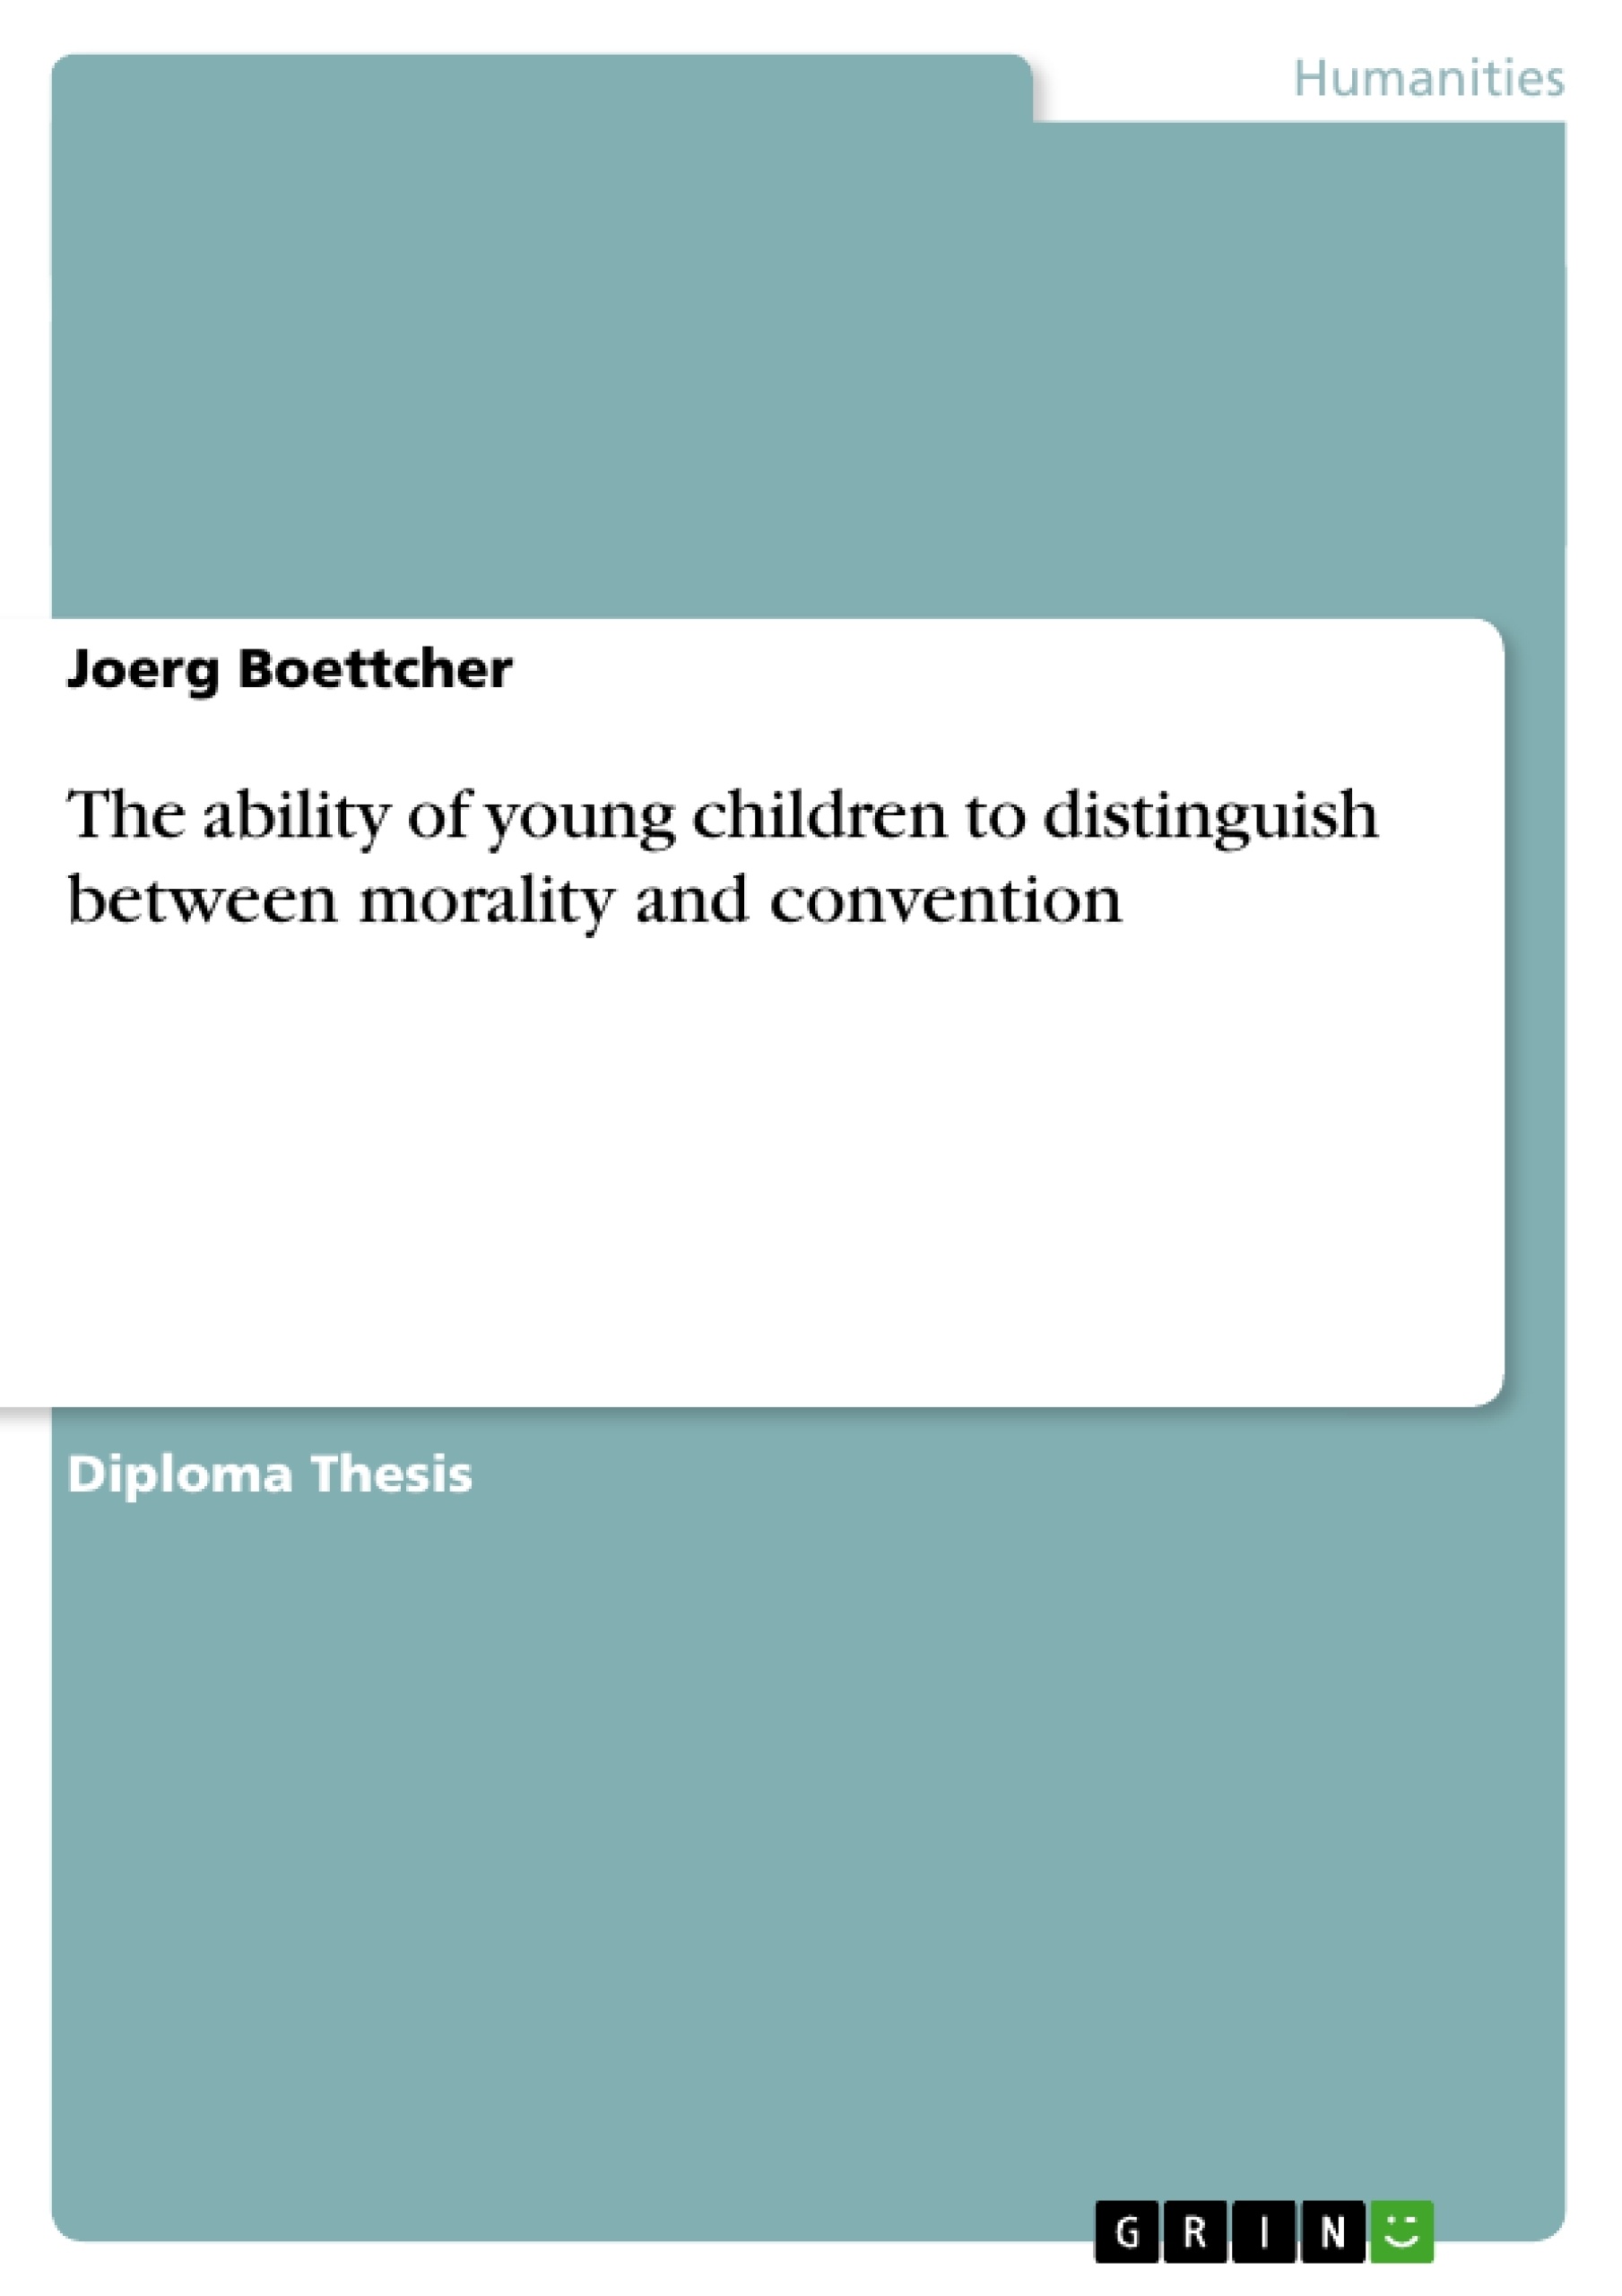 Titre: The ability of young children to distinguish between morality and convention